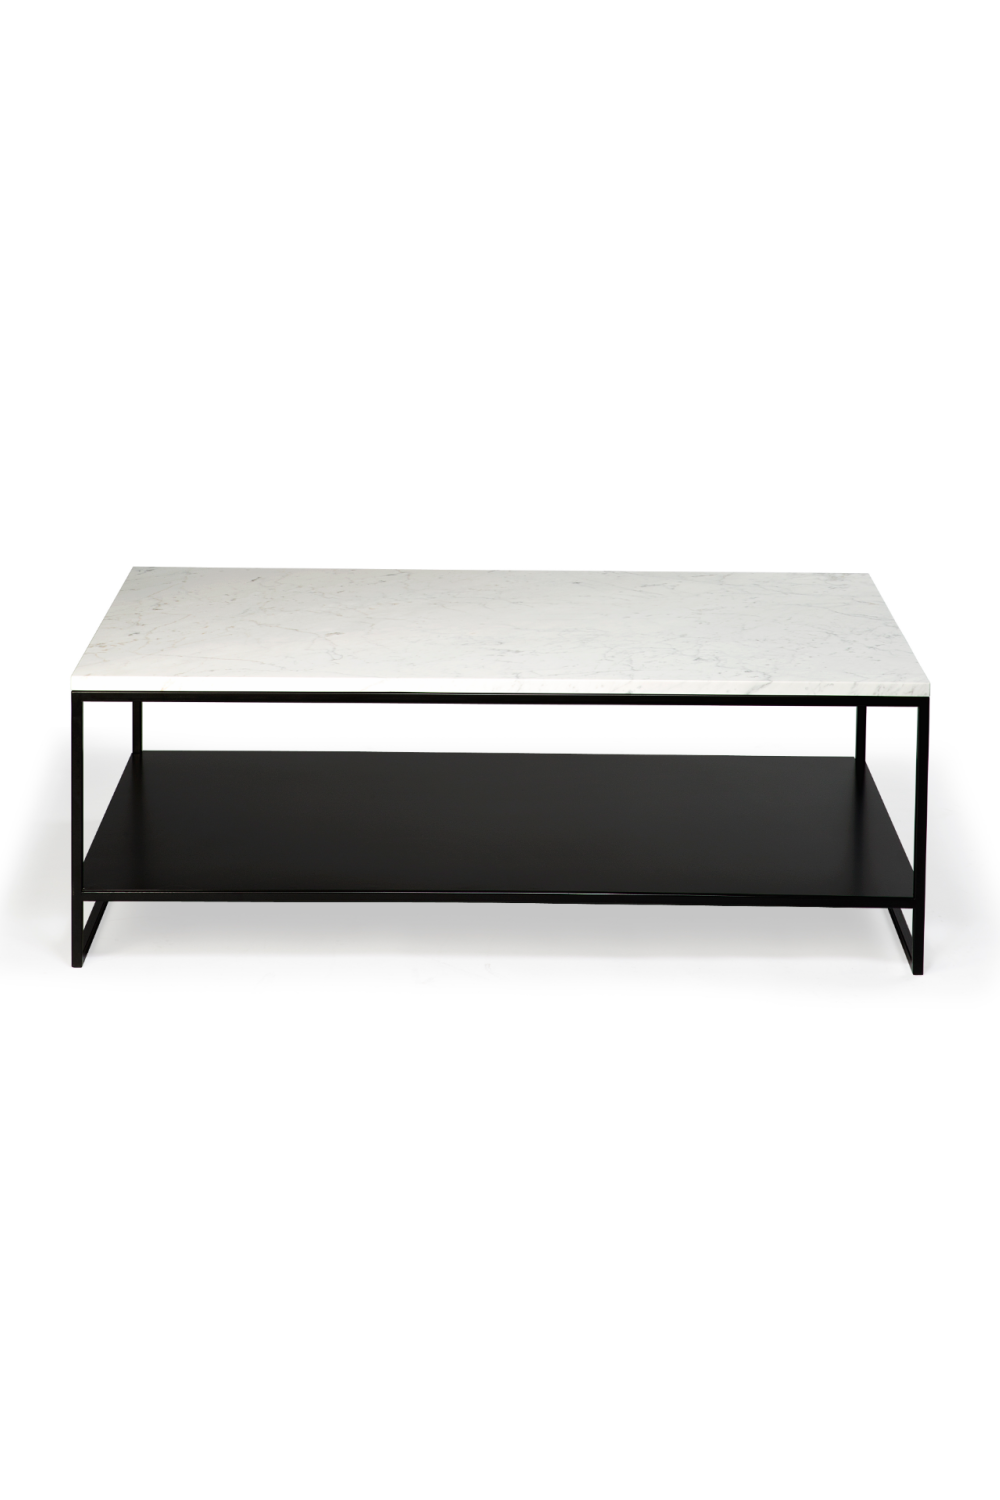 Image of Marble 2-Level Coffee Table | Ethnicraft Stone